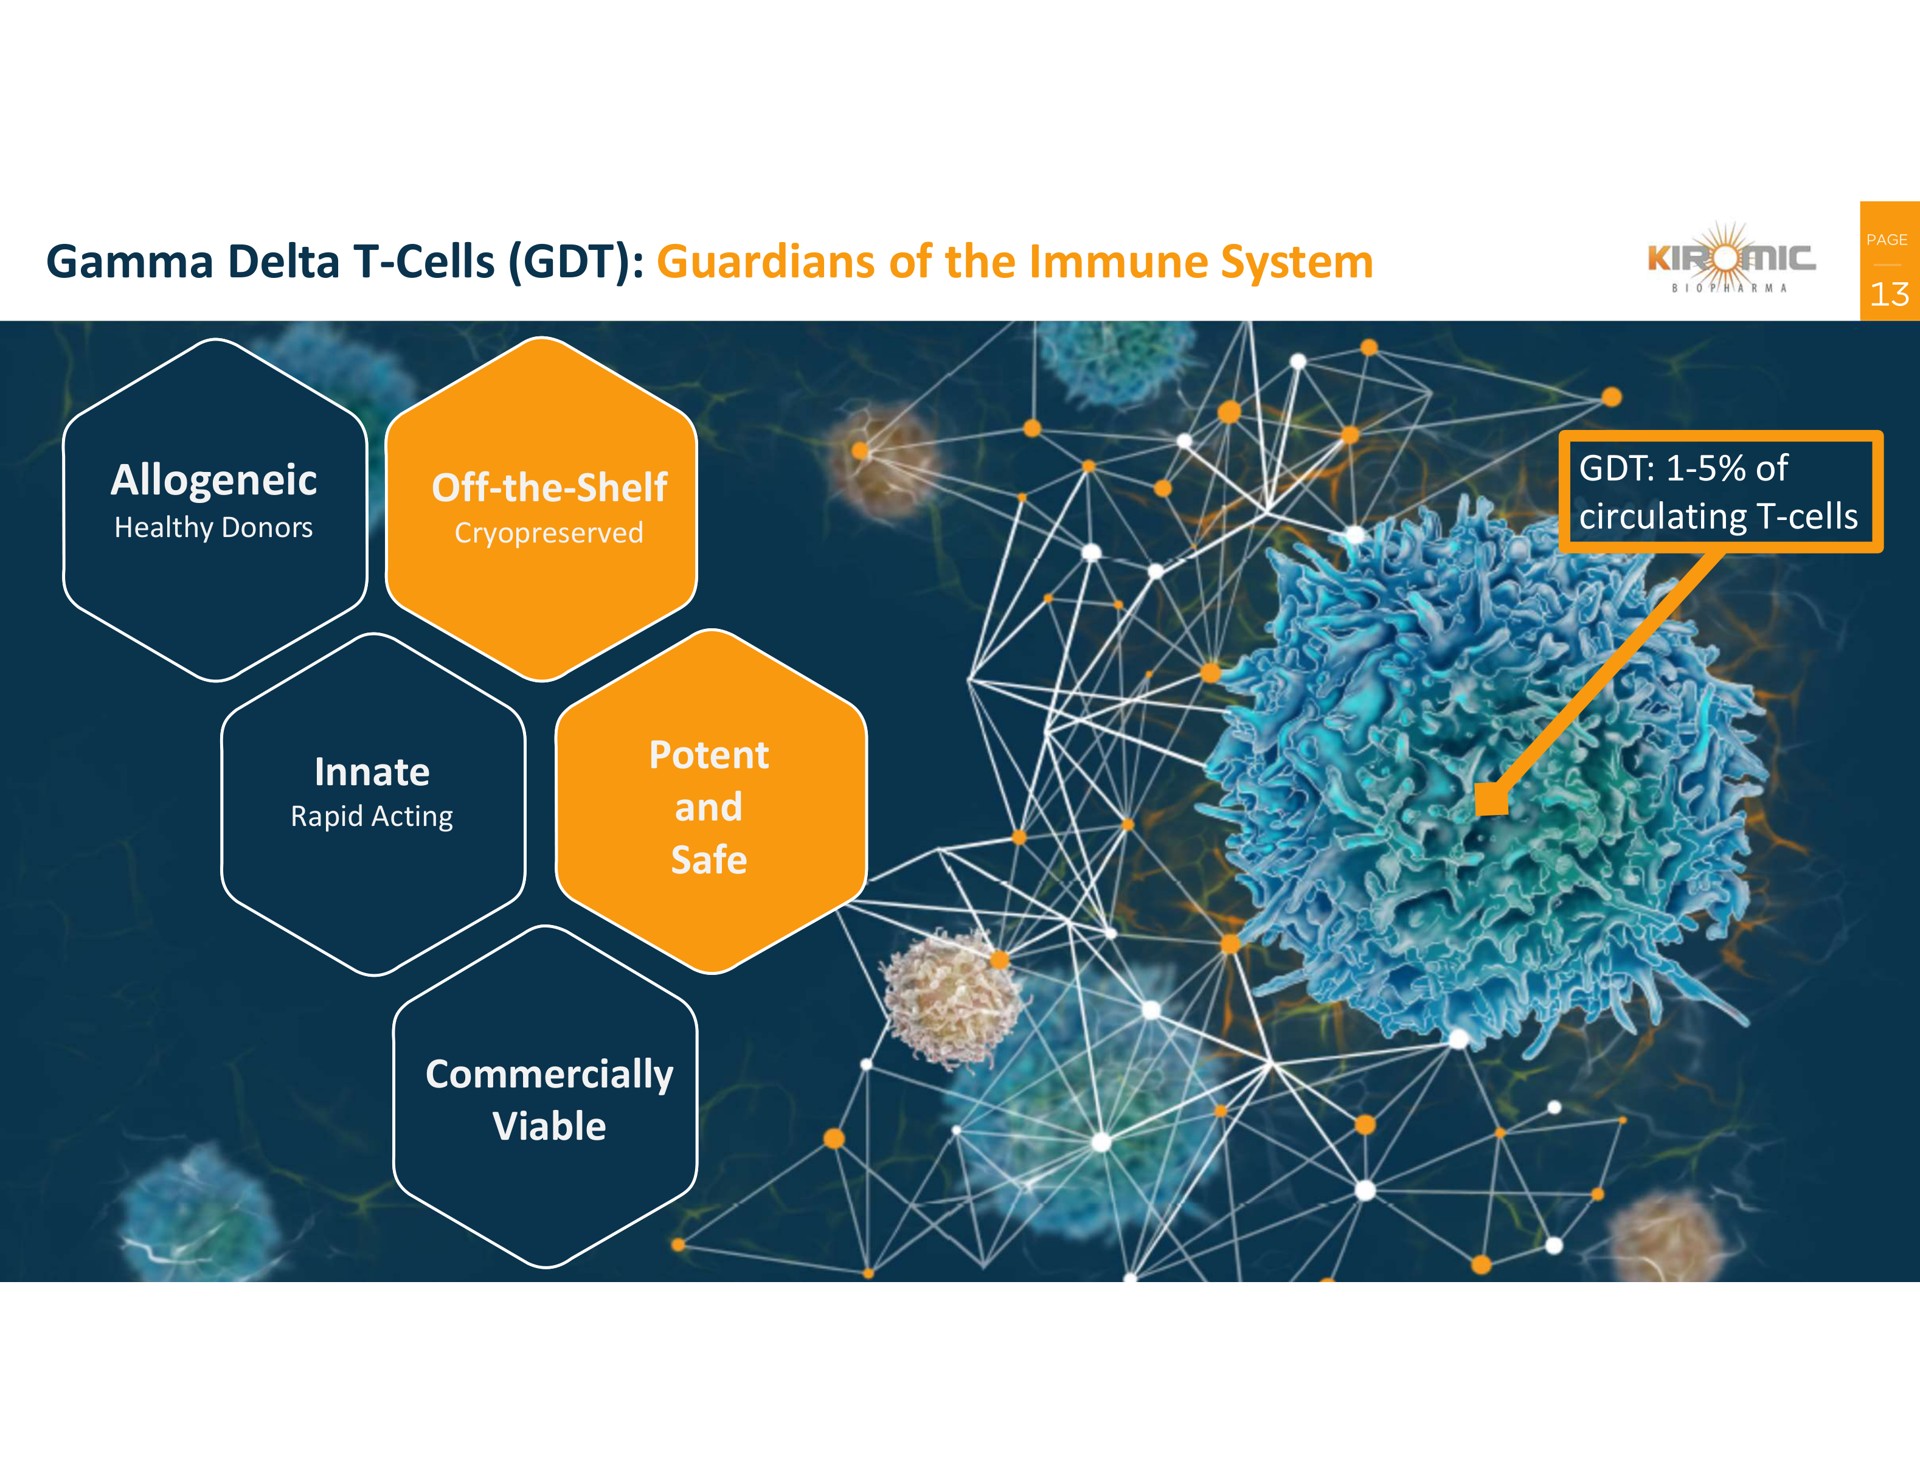 gamma delta cells guardians of the immune system off the shelf innate potent and safe commercially viable | Kiromic BioPharma